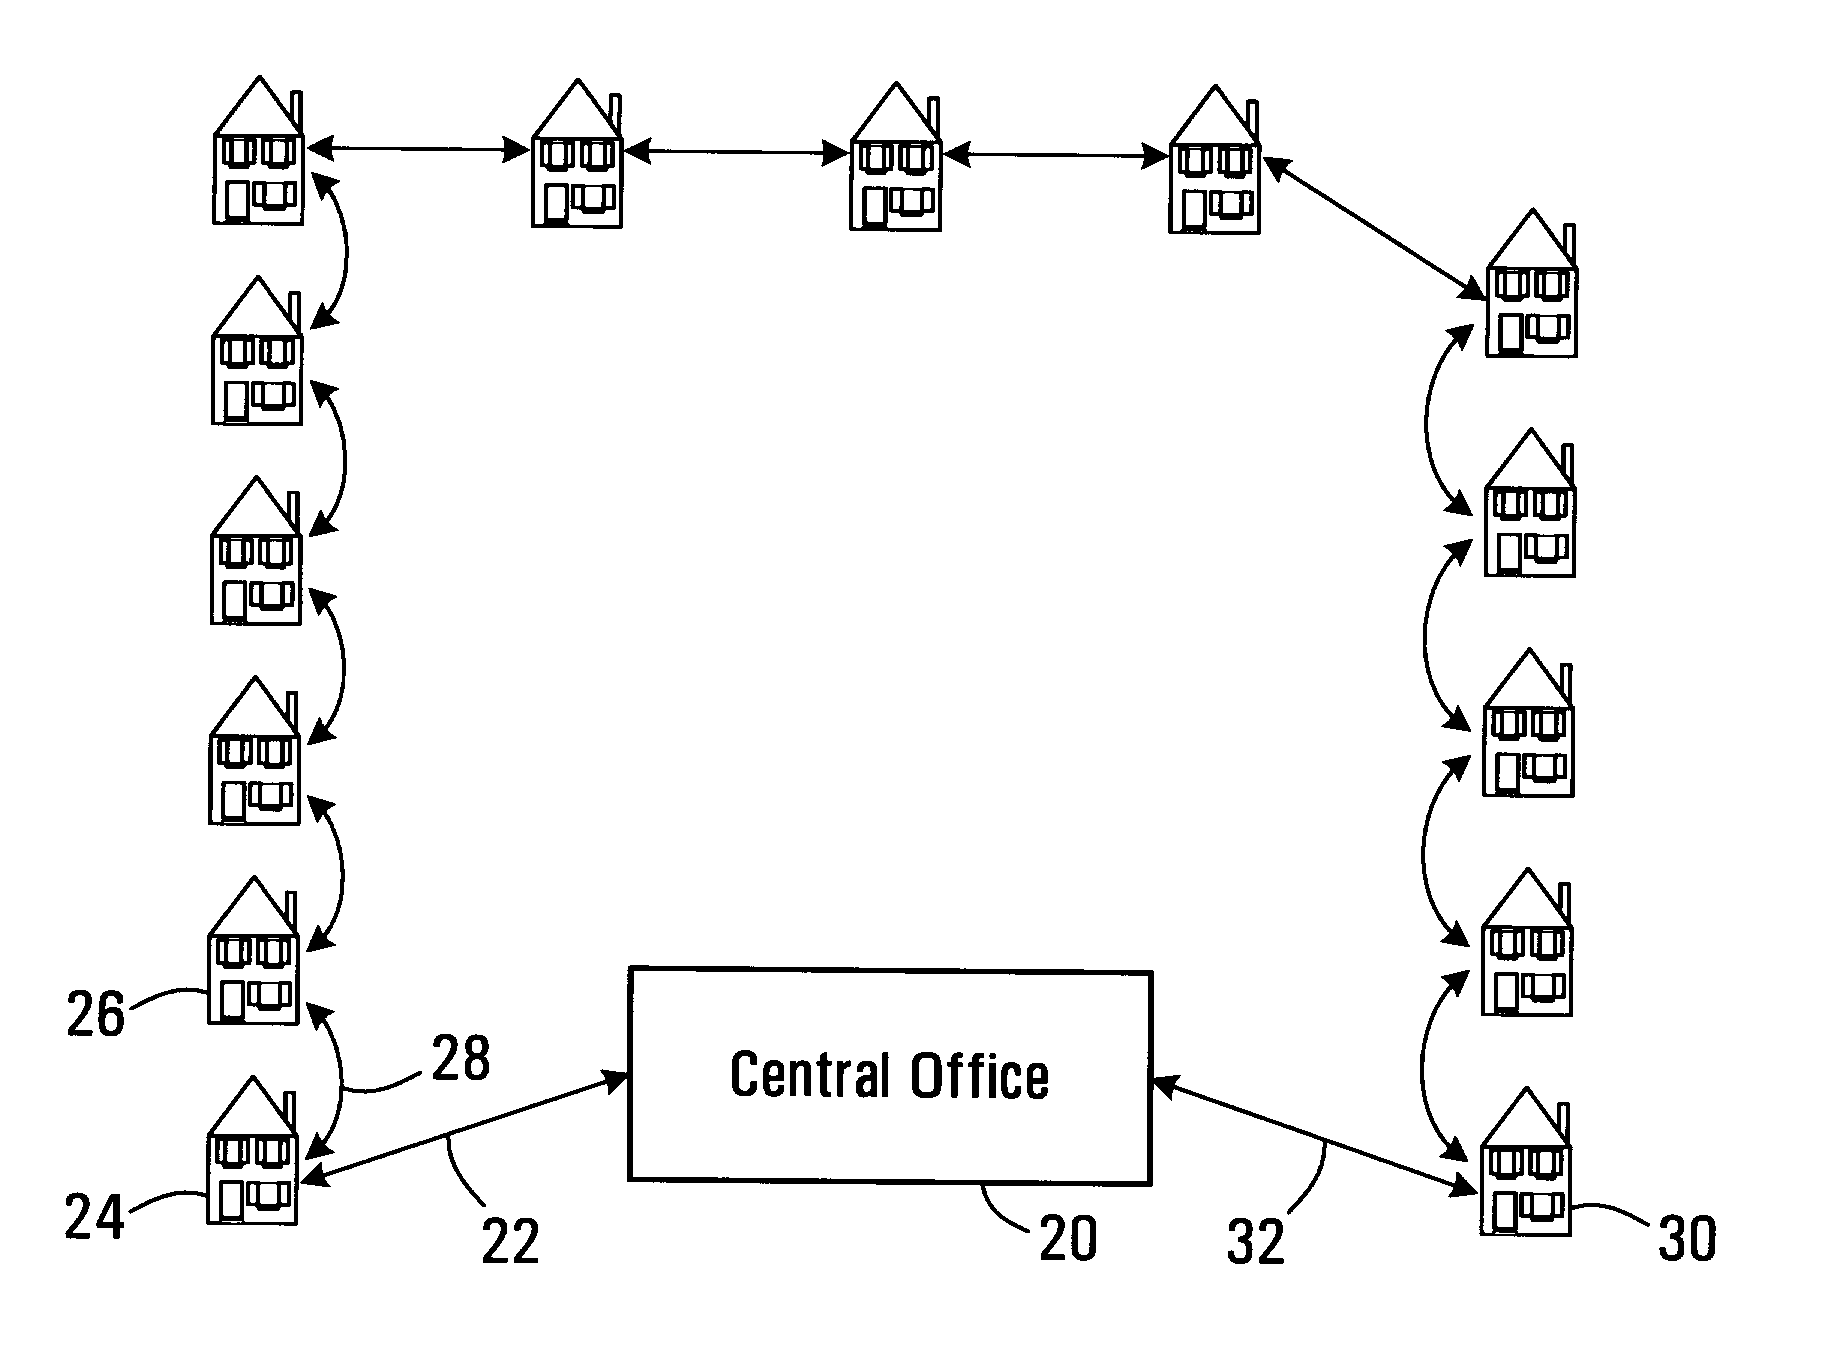 Bonded interconnection of local networks